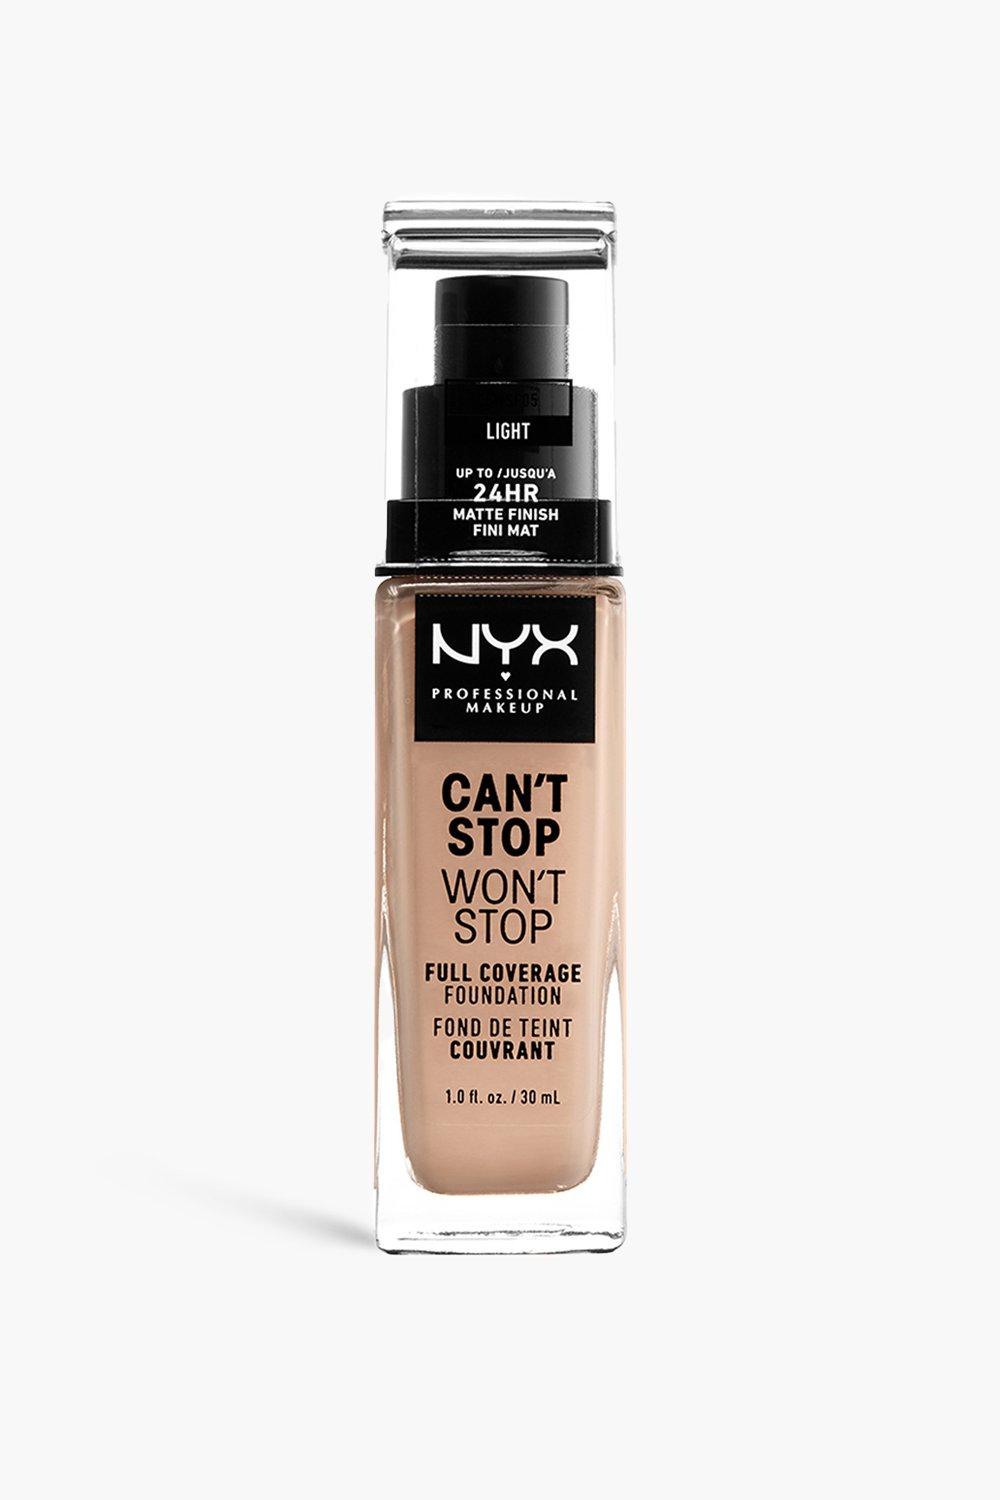 Nyx Professional Makeup Can'T Stop Won'T Stop Full Coverage Foundation, Light